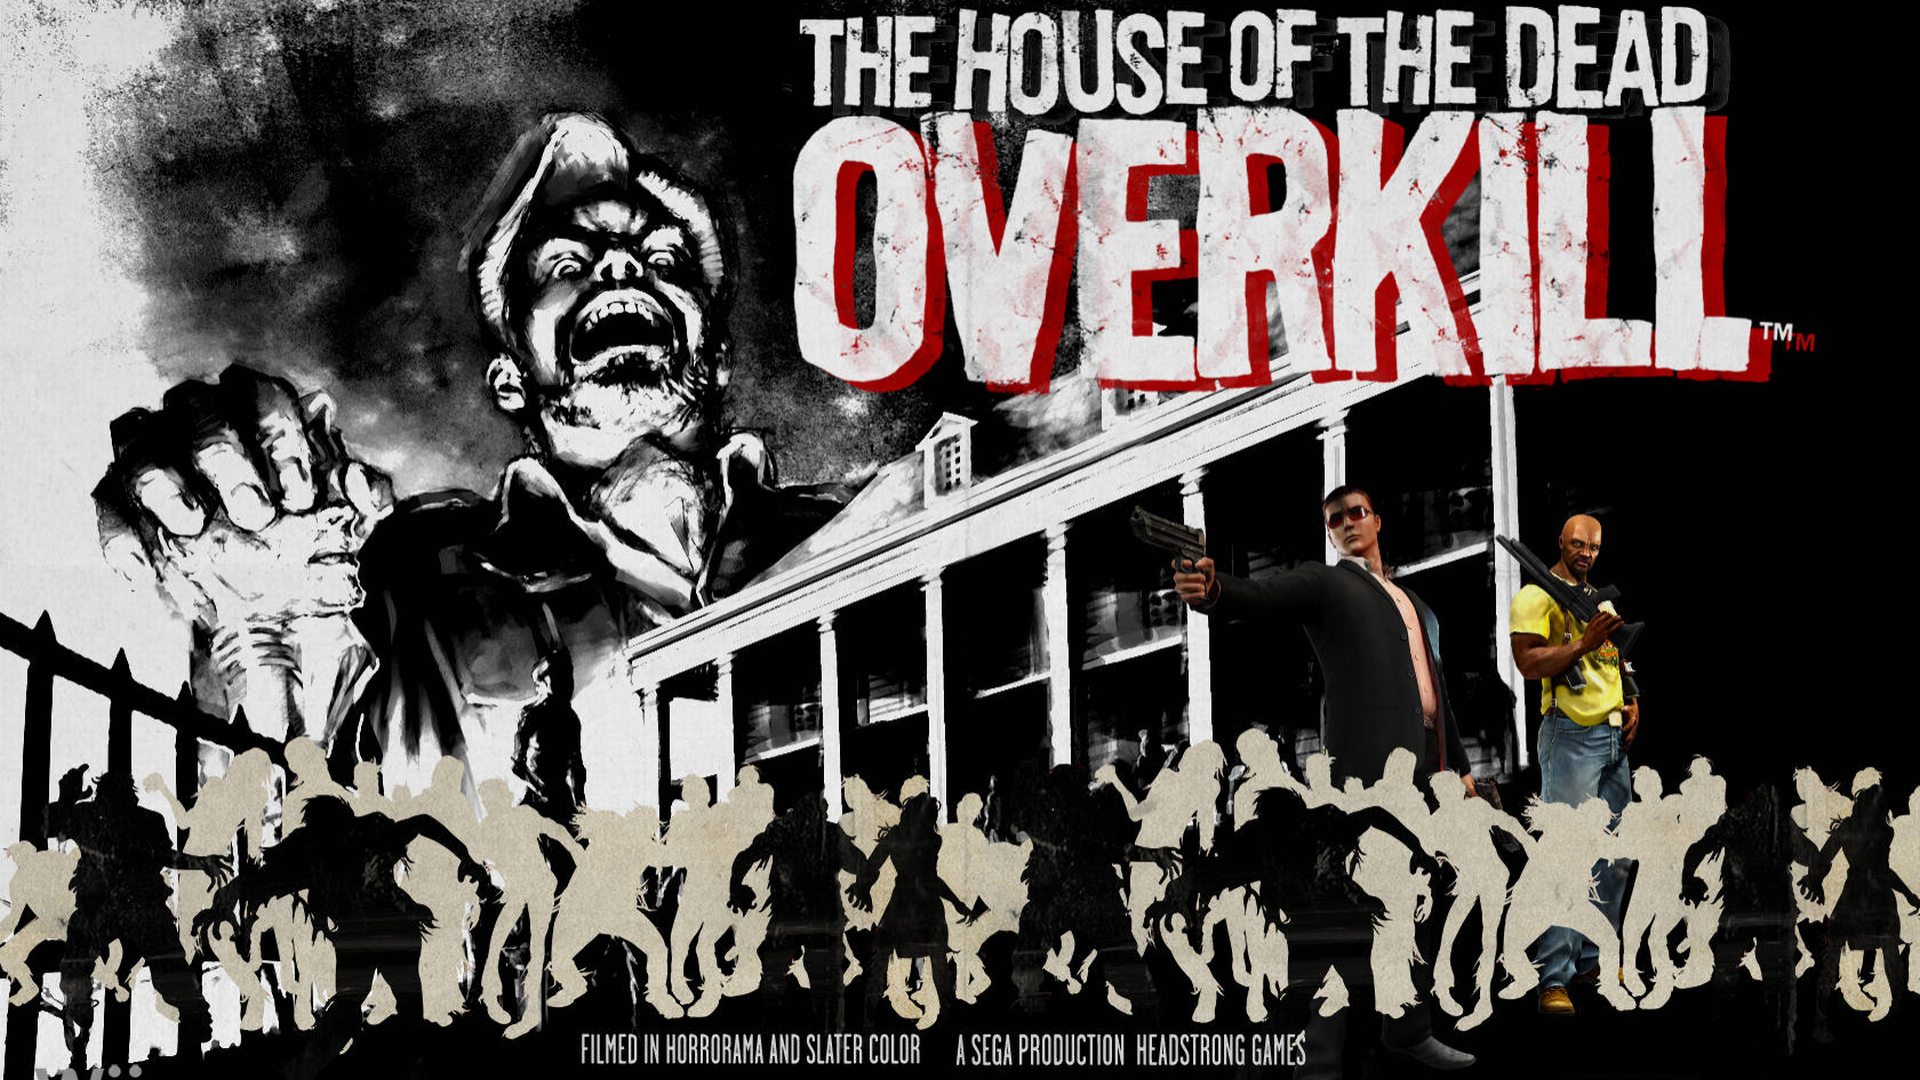 The house of the dead overkill pc game free download for windows 7